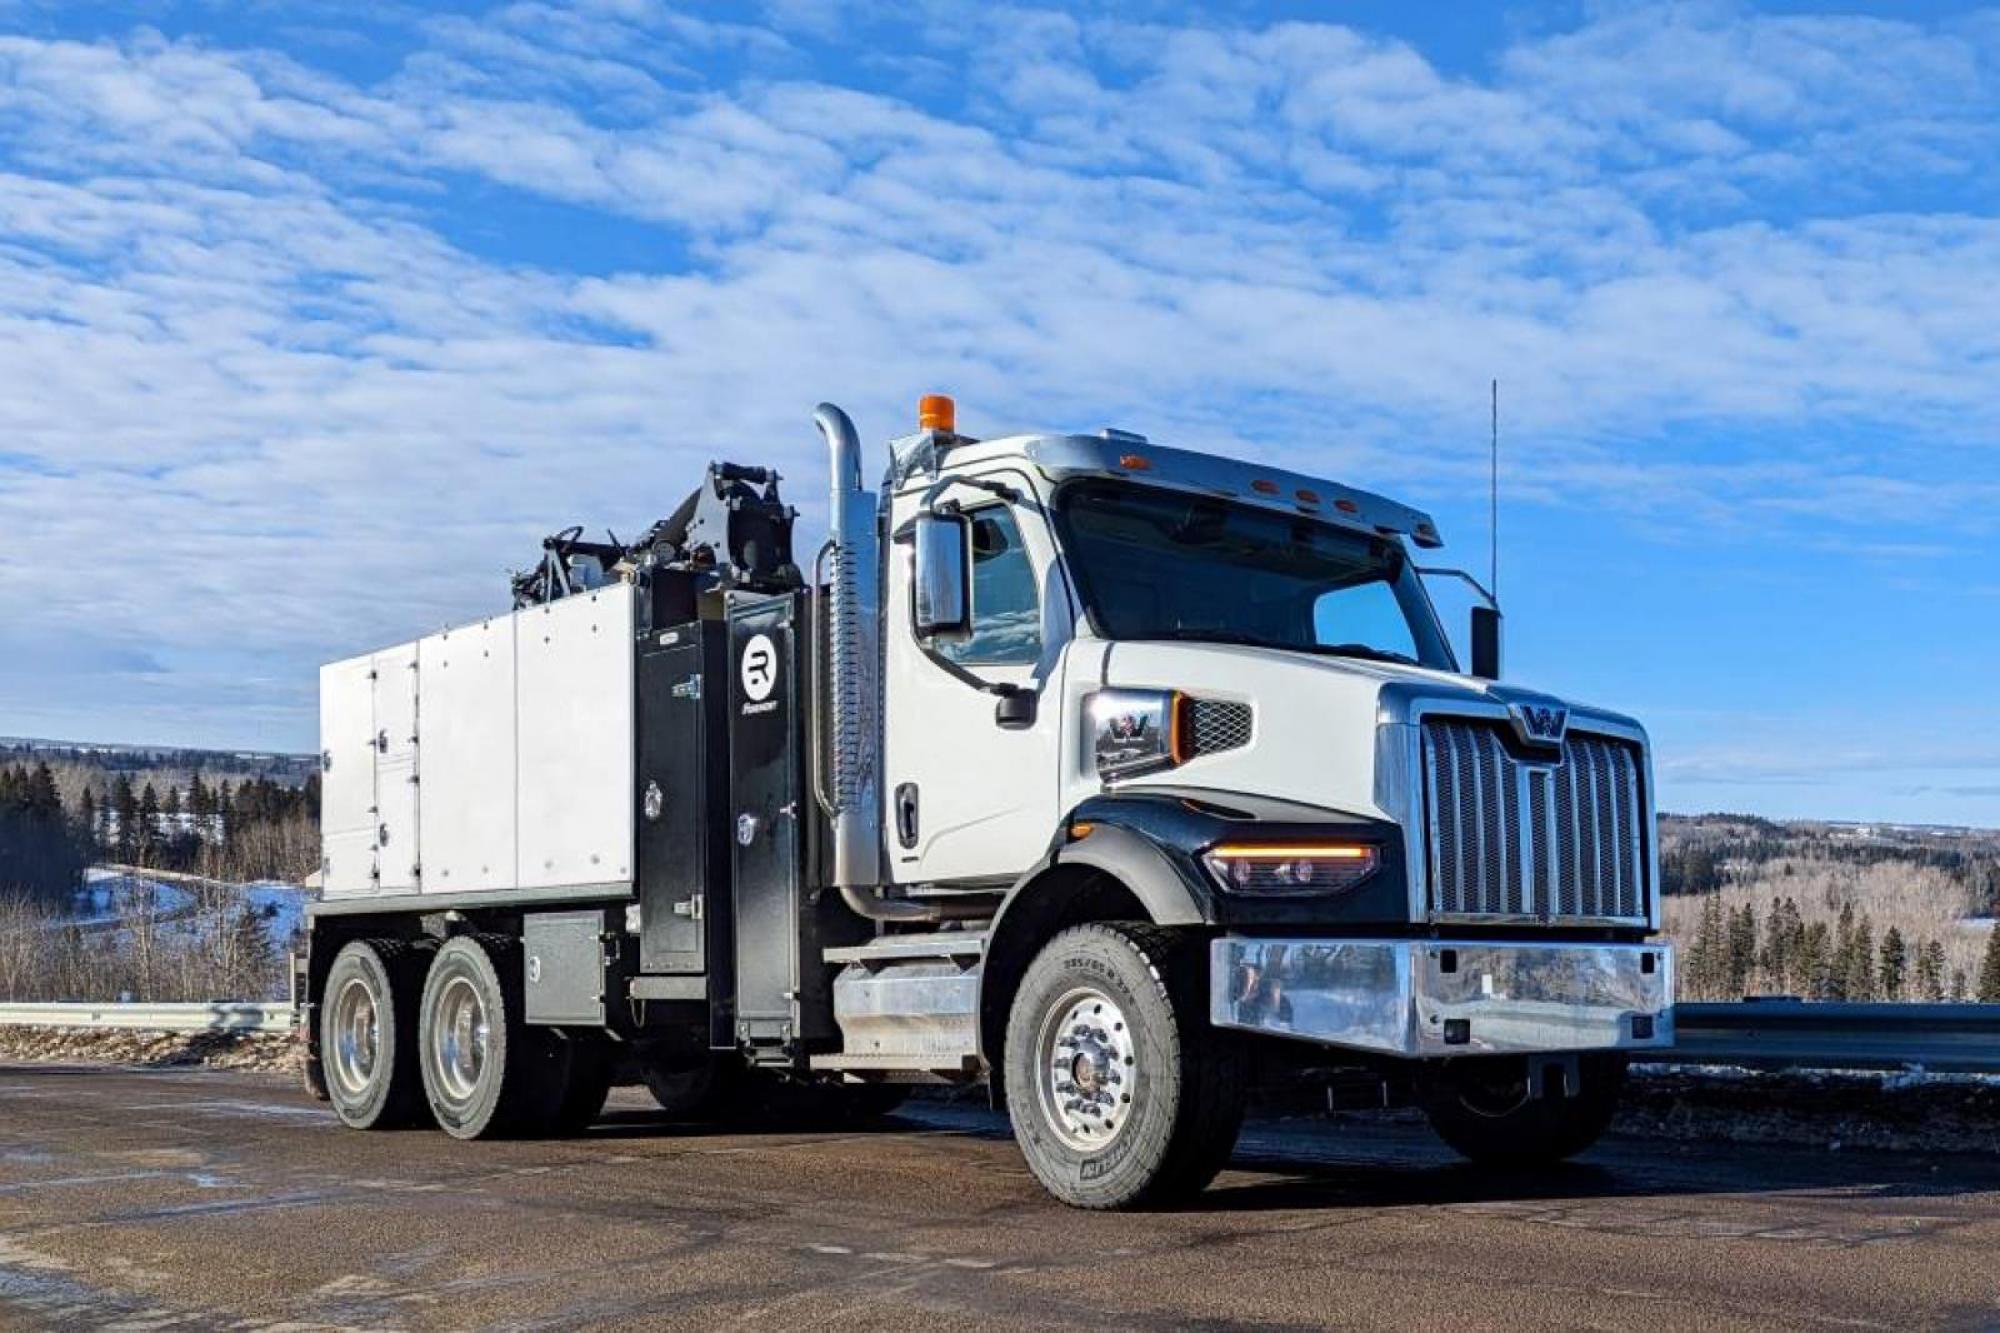 hydrovac trucks for sale near me - transwest foremost rival western star freightliner